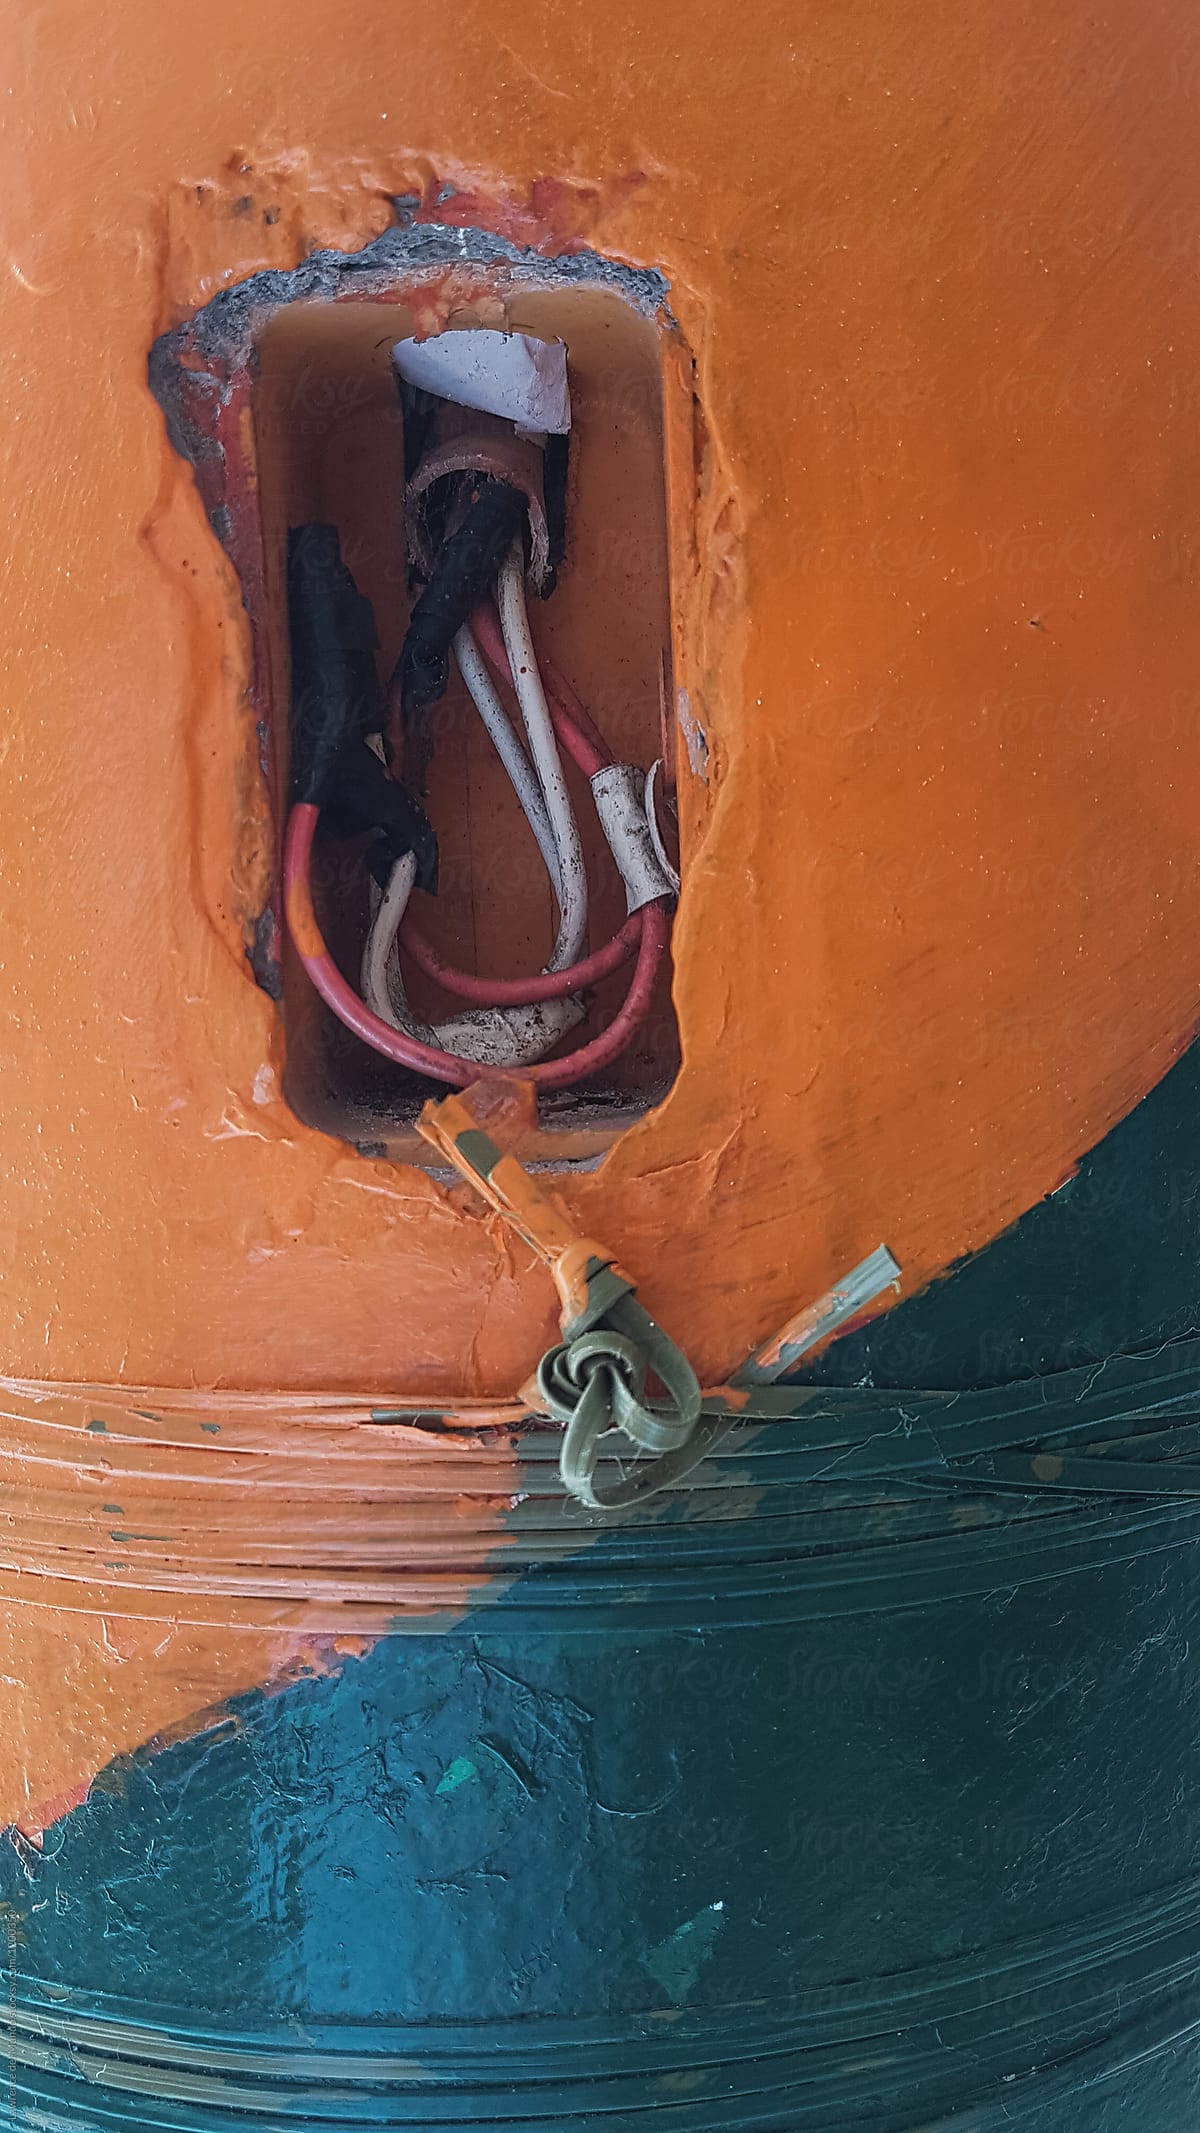 Damaged power outlet on a wall painted with bright colors.